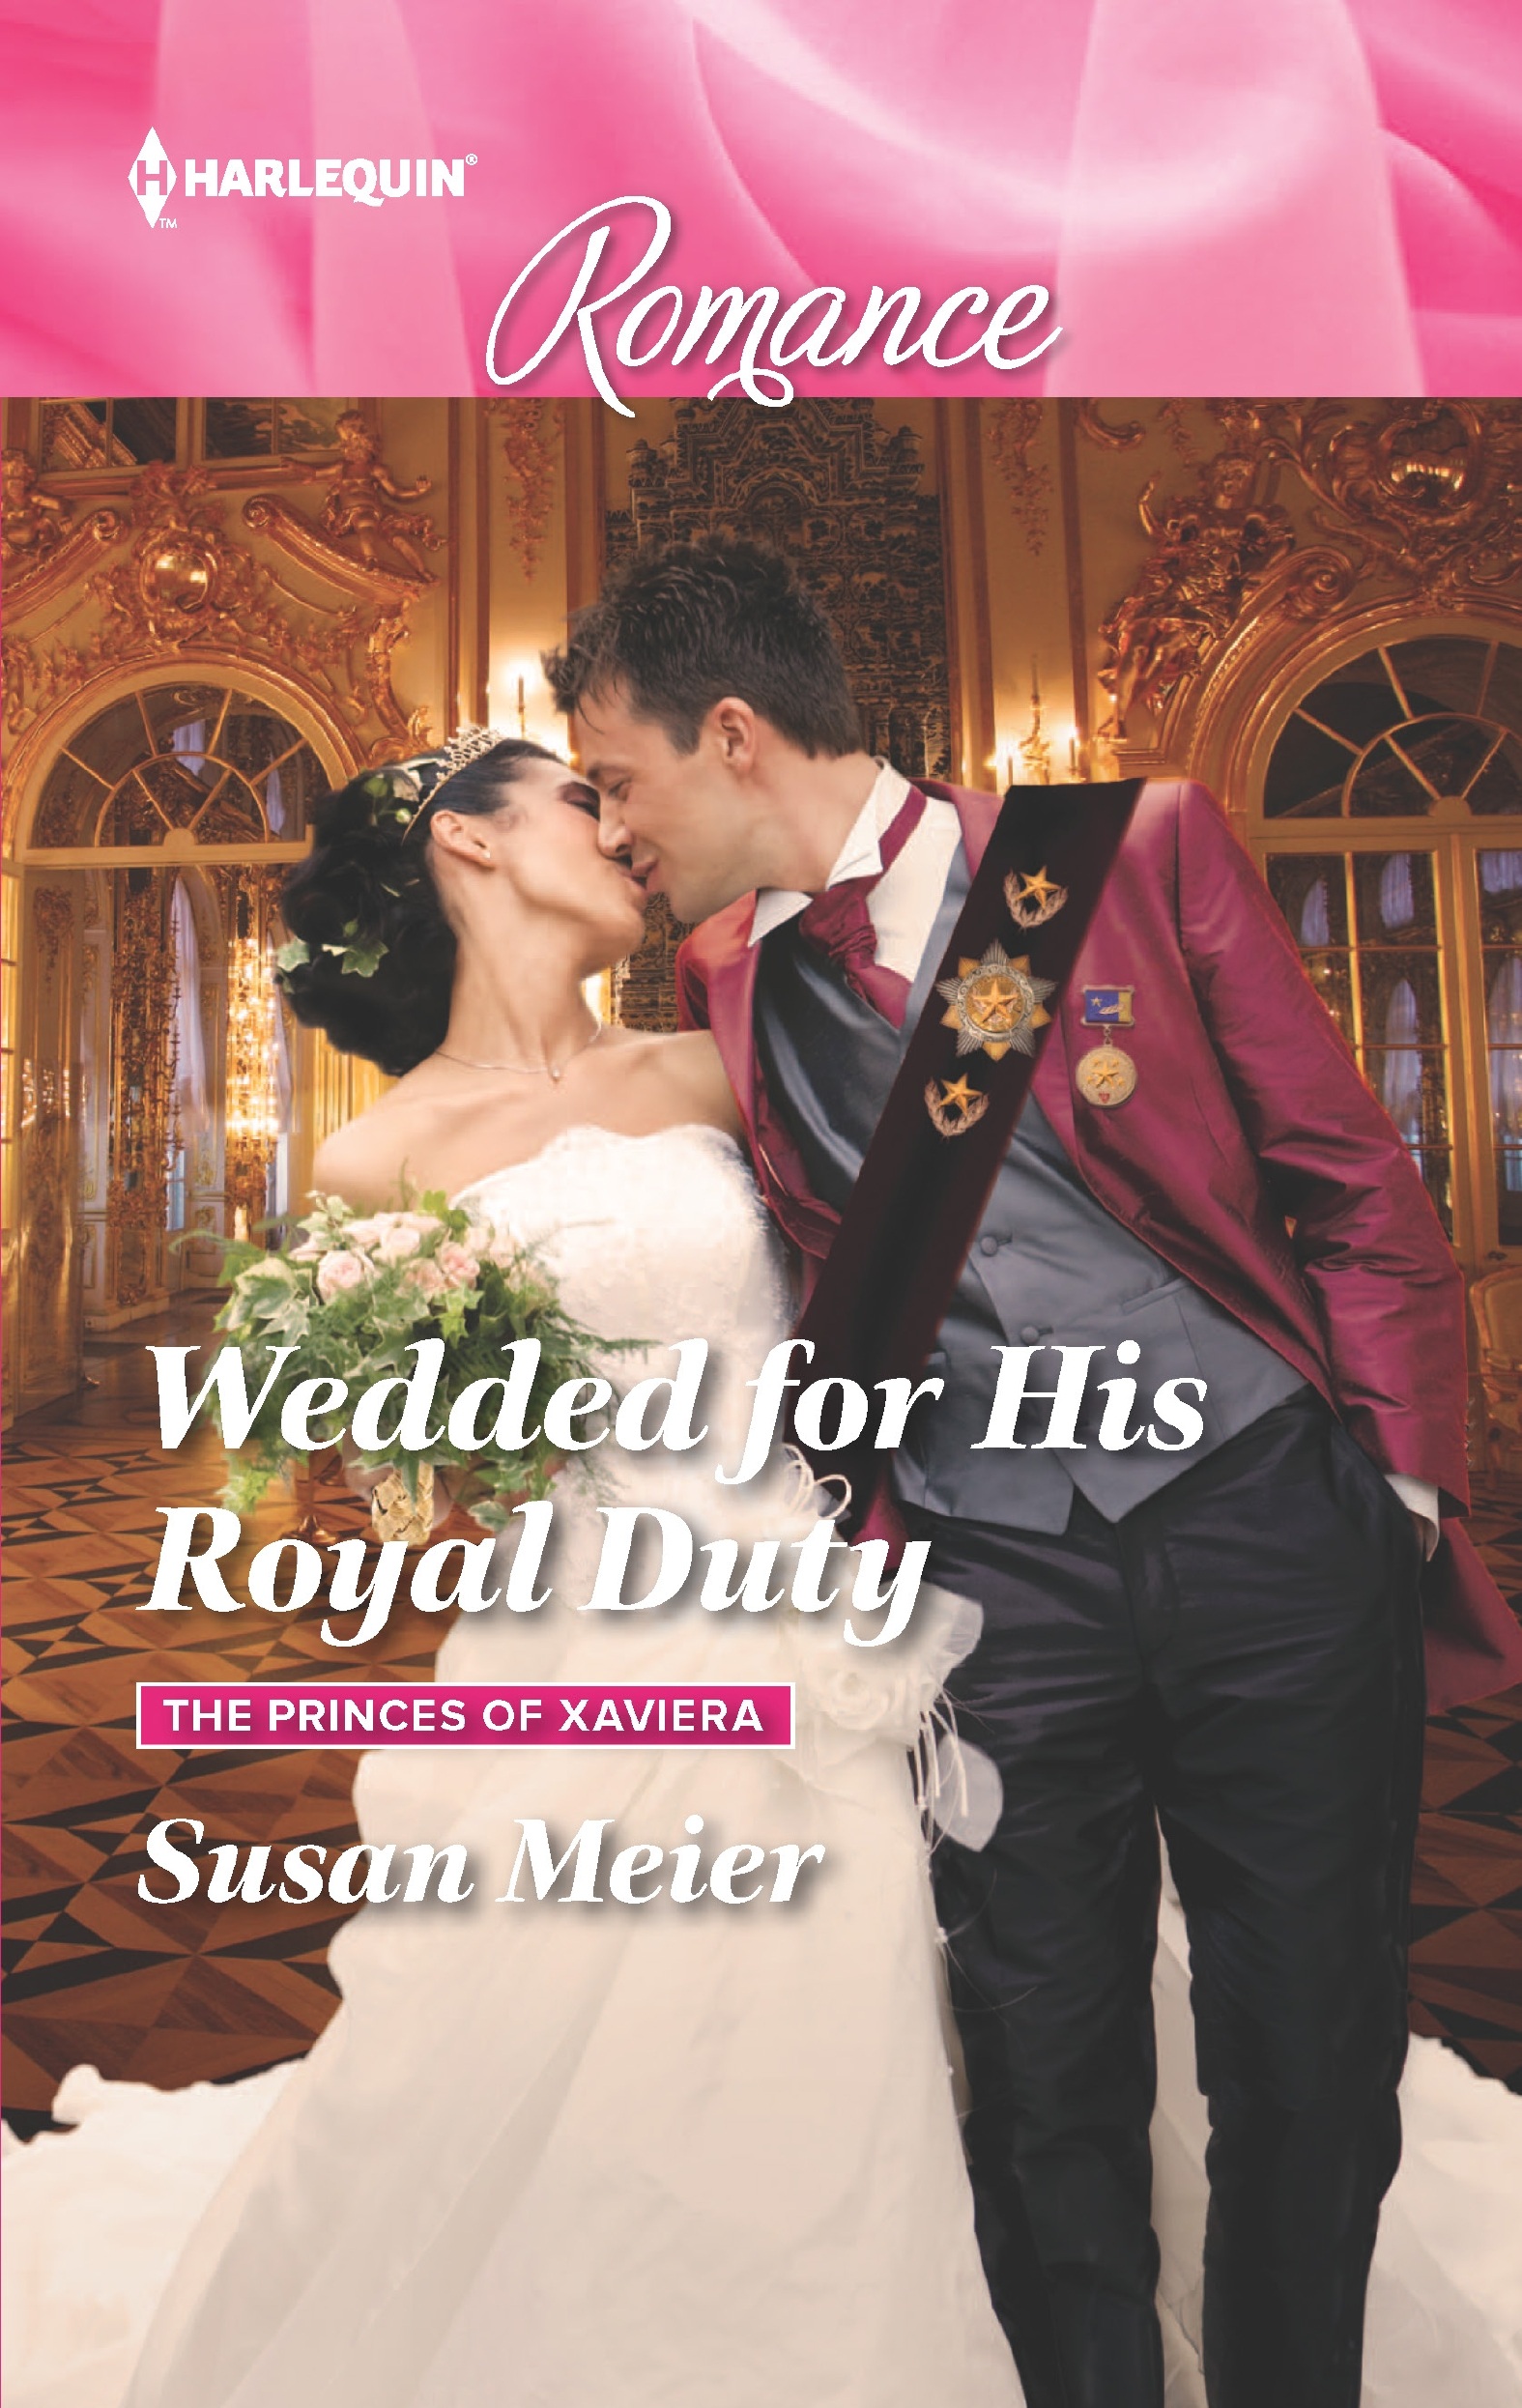 Wedded for His Royal Duty (2016) by Susan Meier